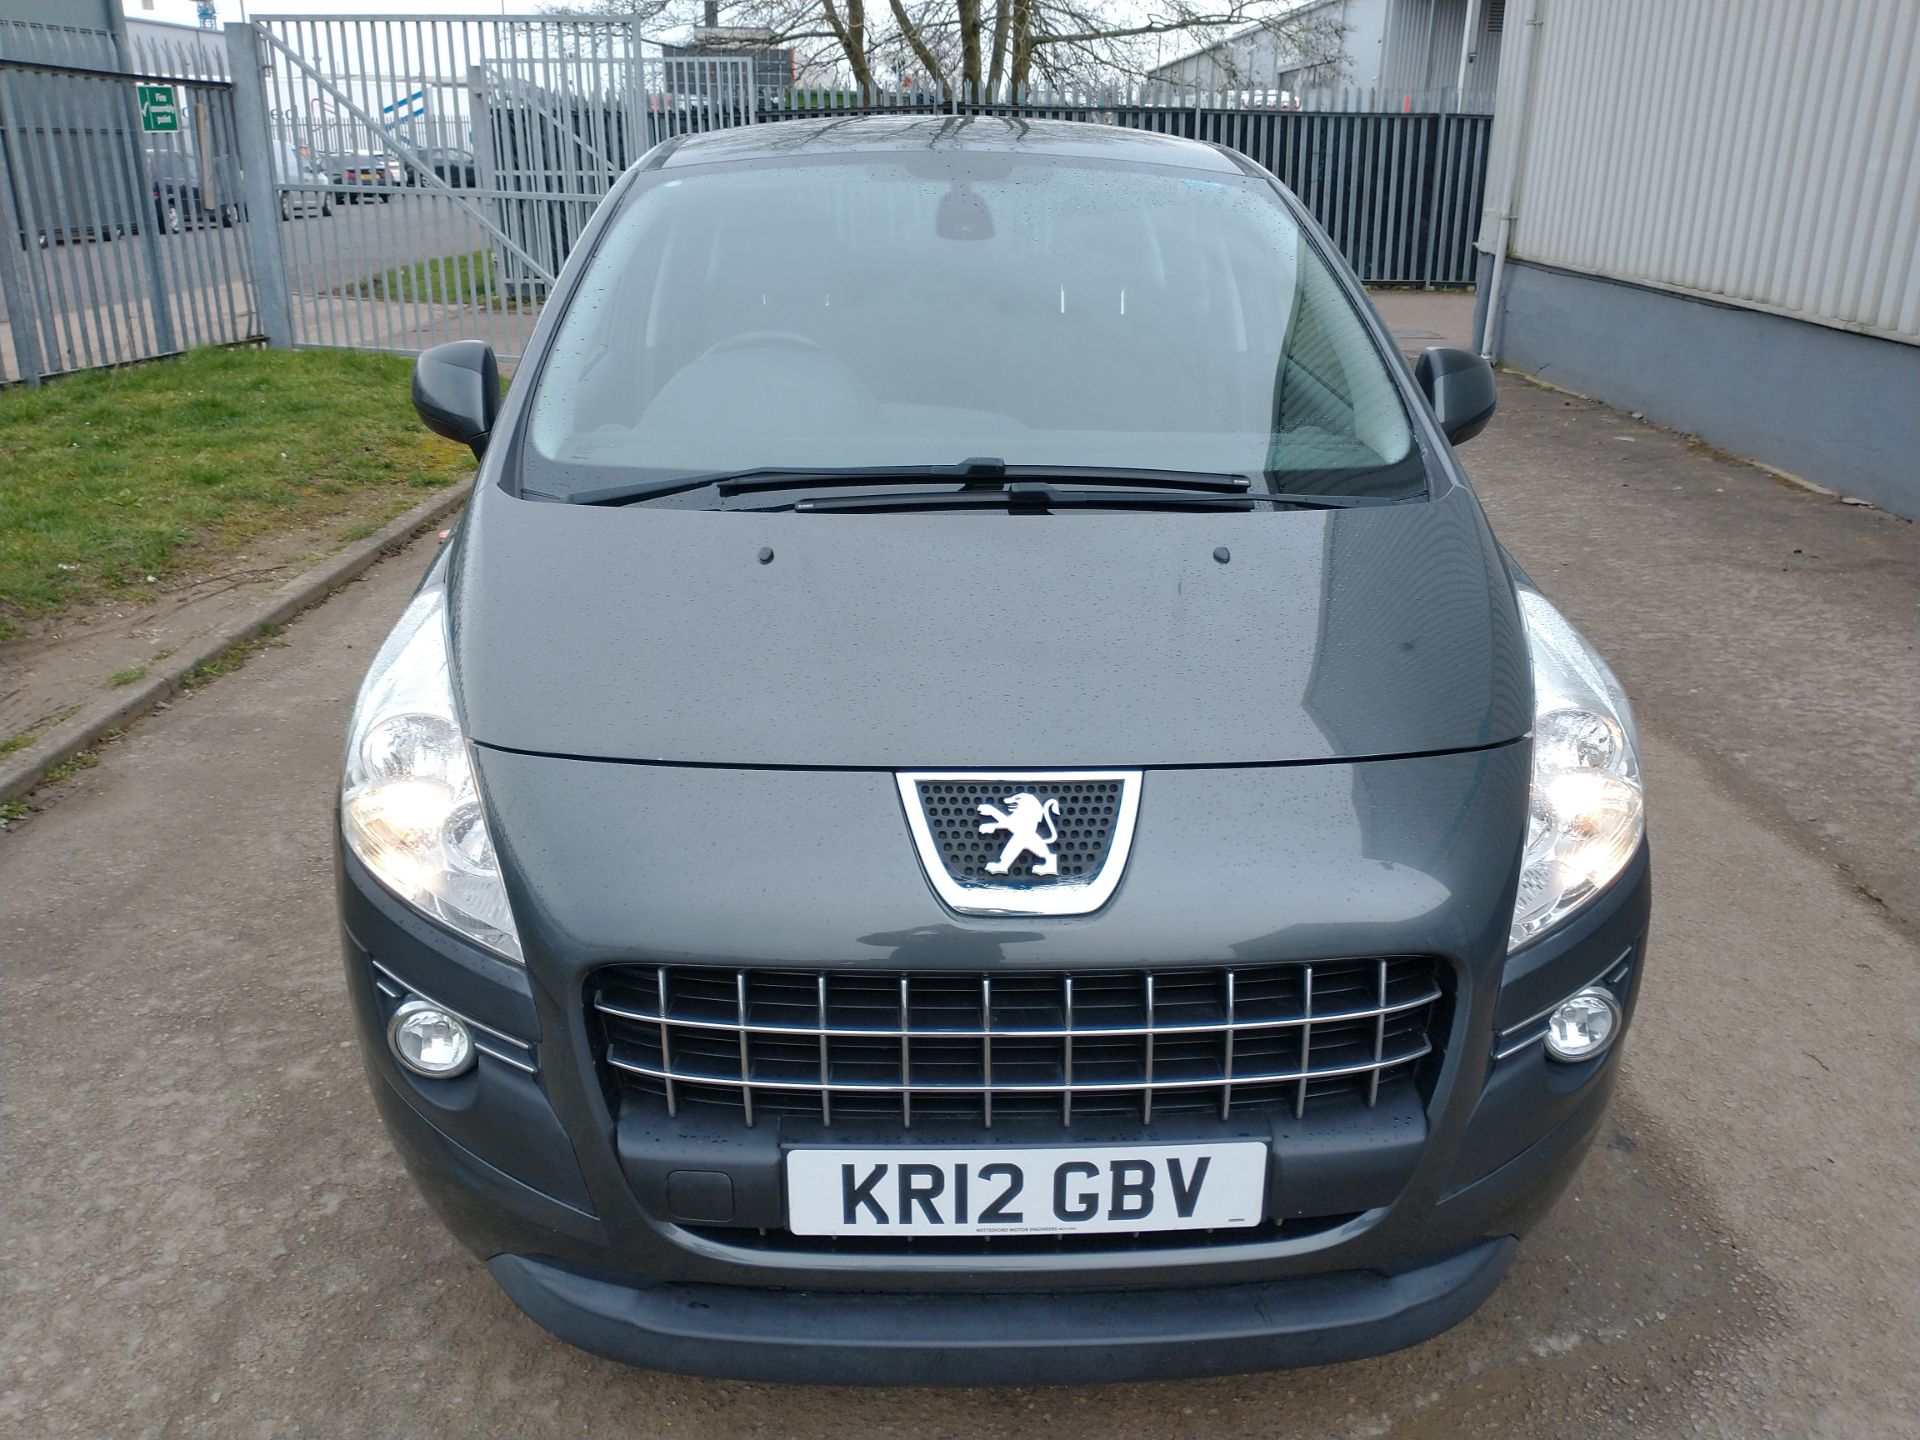 2012 Peugeot 3008 Active HDI 1.6 5DR SUV - CL505 - NO VAT ON THE HAMM - Image 3 of 19